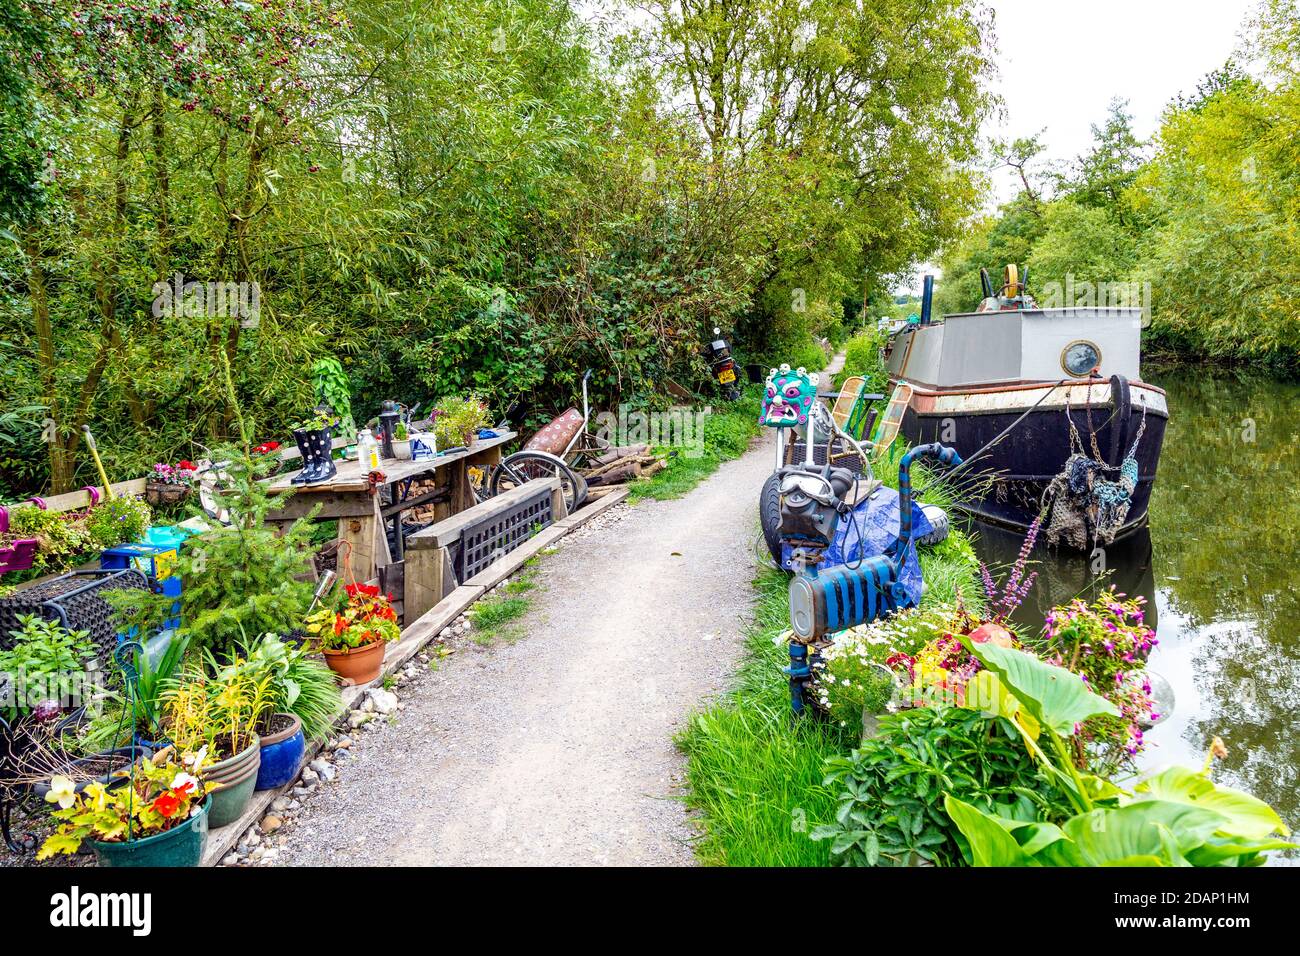 A richly decorated, unusual garden of a houseboat owner along the Grand Union Canal, Colne Valley, UK Stock Photo